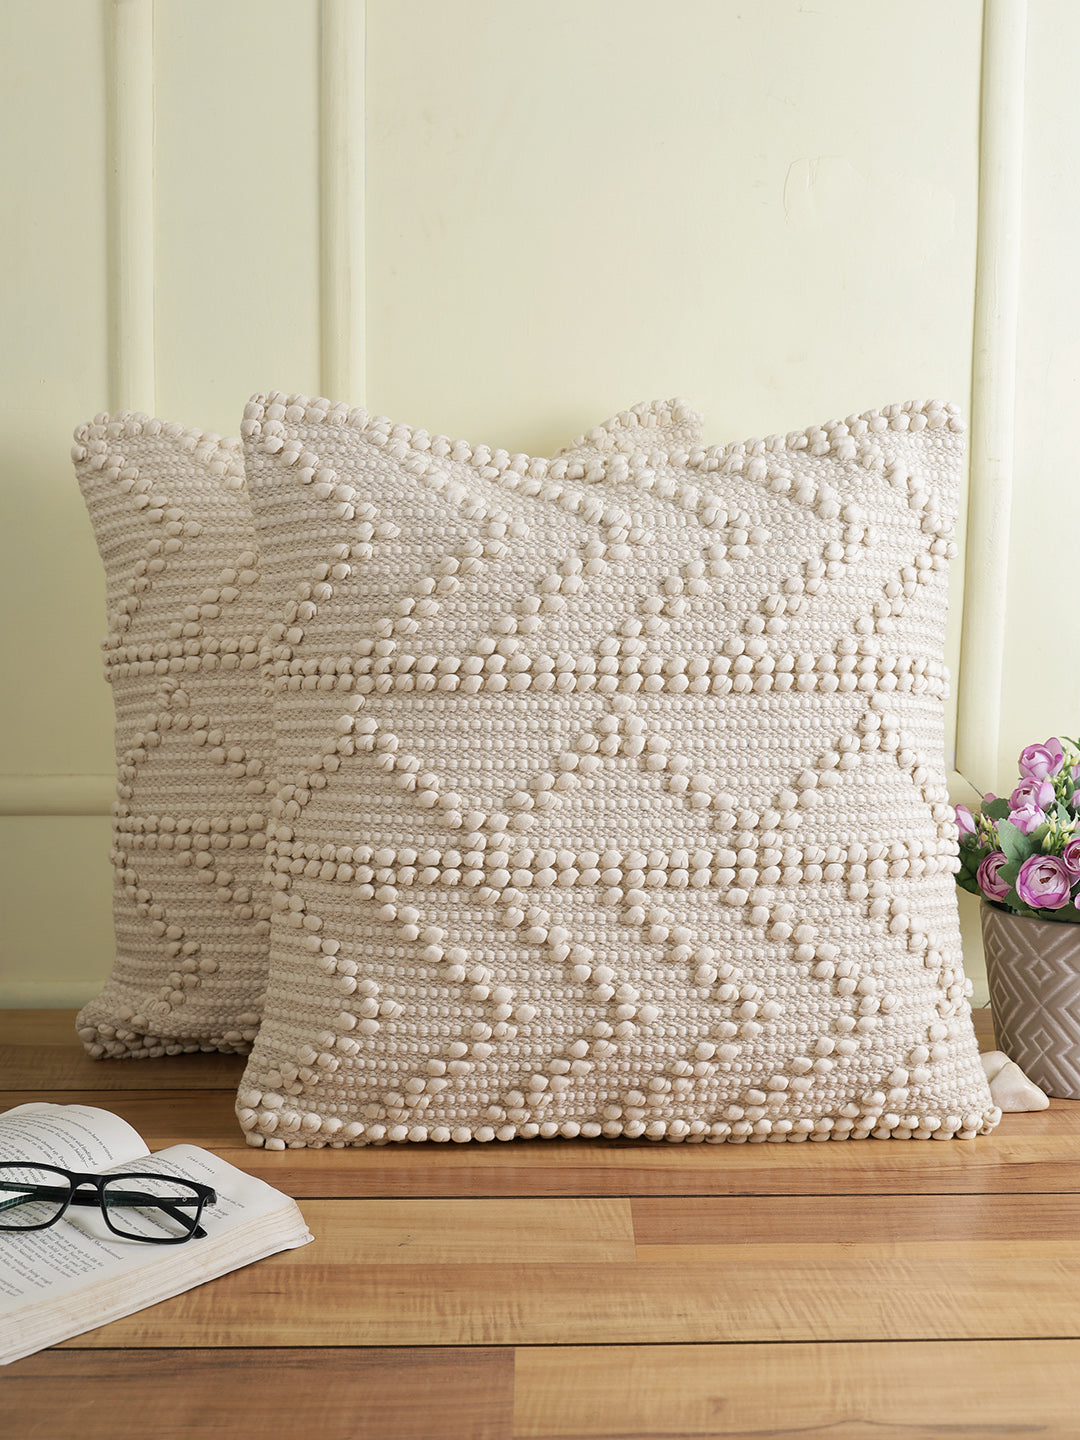 Off White Set of 2 Self Design Square Cushion Covers